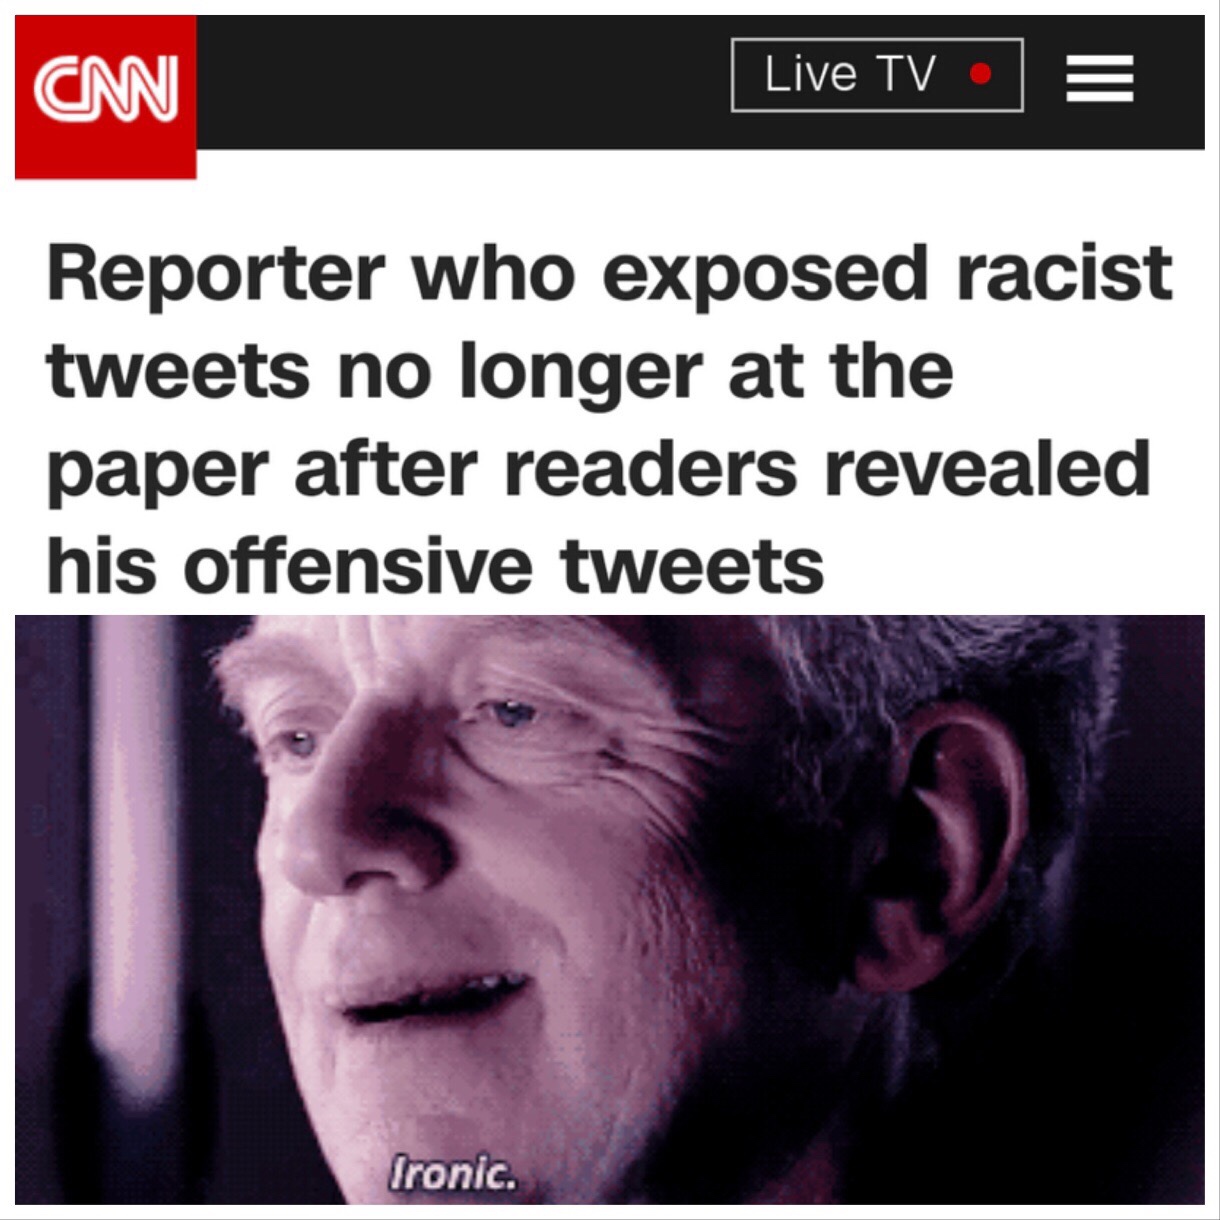 ionic meme - Cnn Live Tve Reporter who exposed racist tweets no longer at the paper after readers revealed his offensive tweets Ironic.